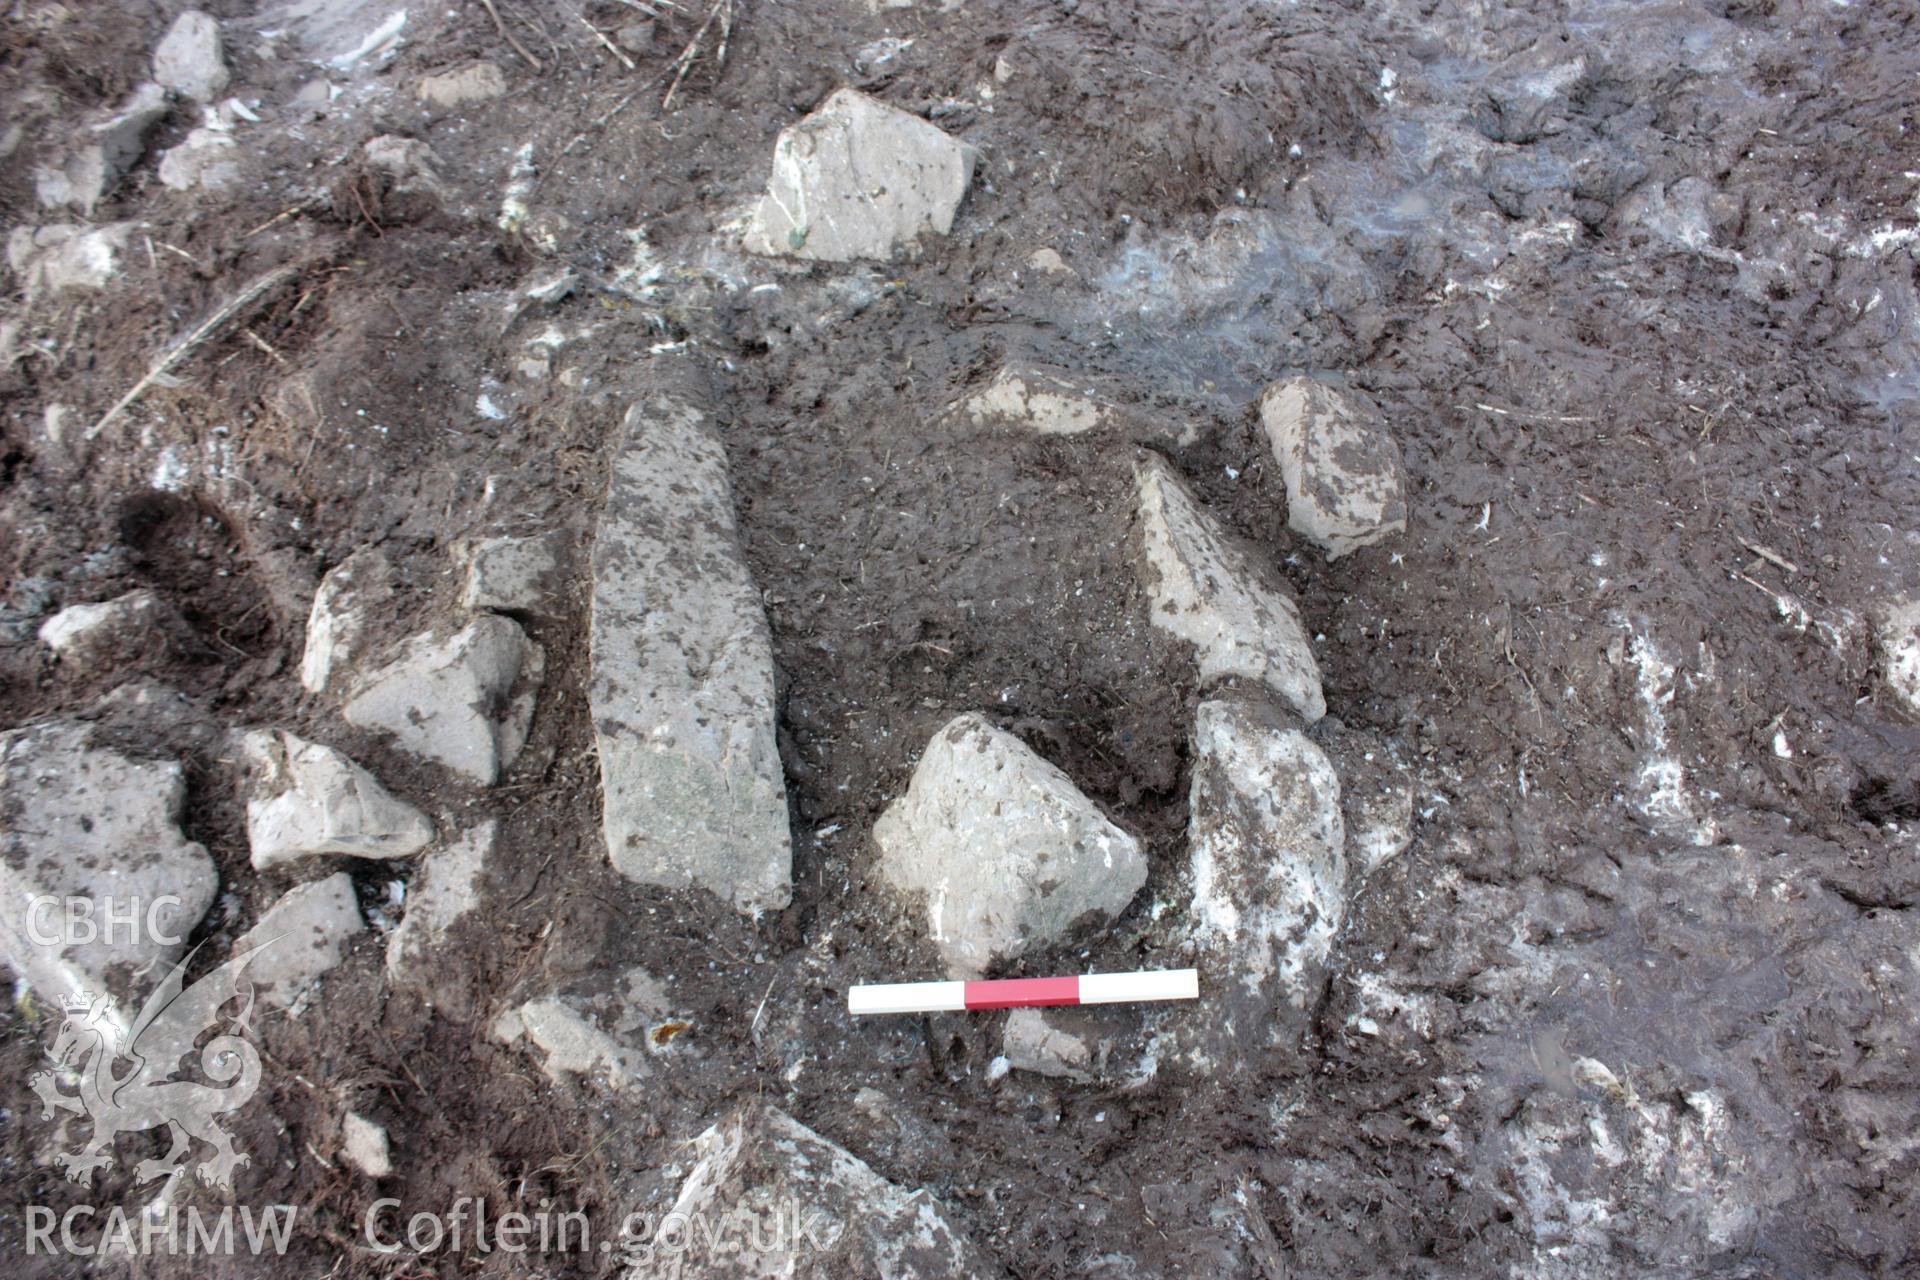 Roundhouse 1, Grassholm Island. Possible hearth feature within the roundhouse.